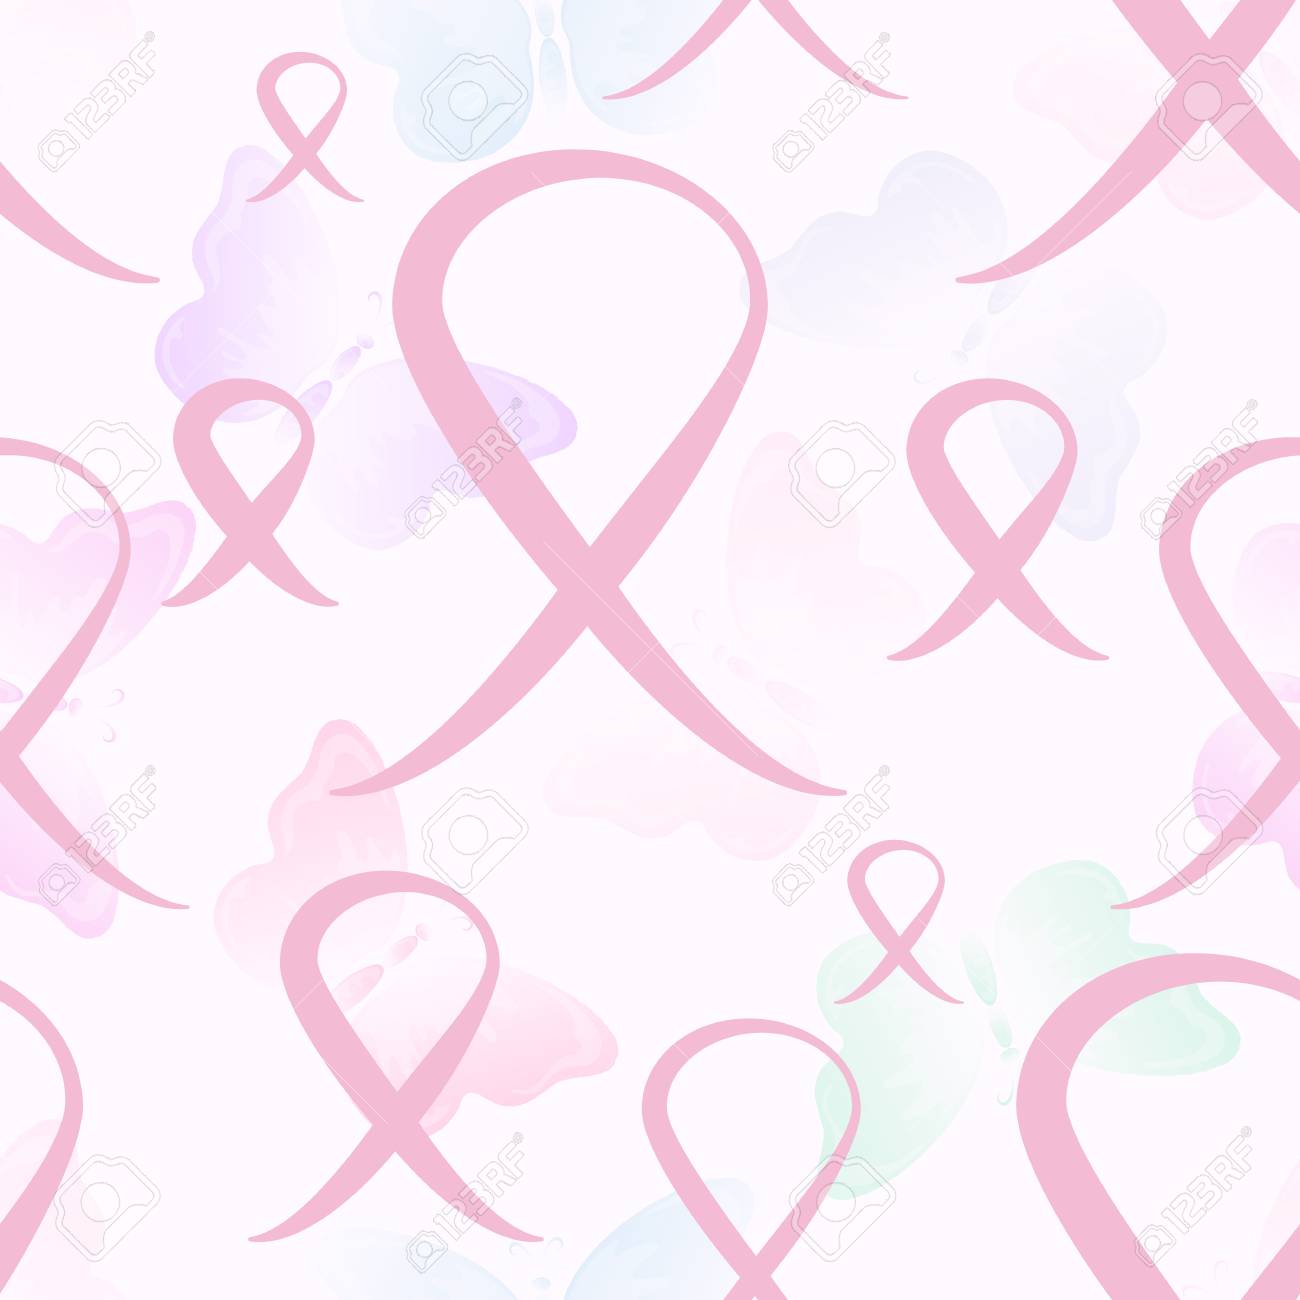 Breast Cancer Awareness Background With Pink Ribbon Seamless